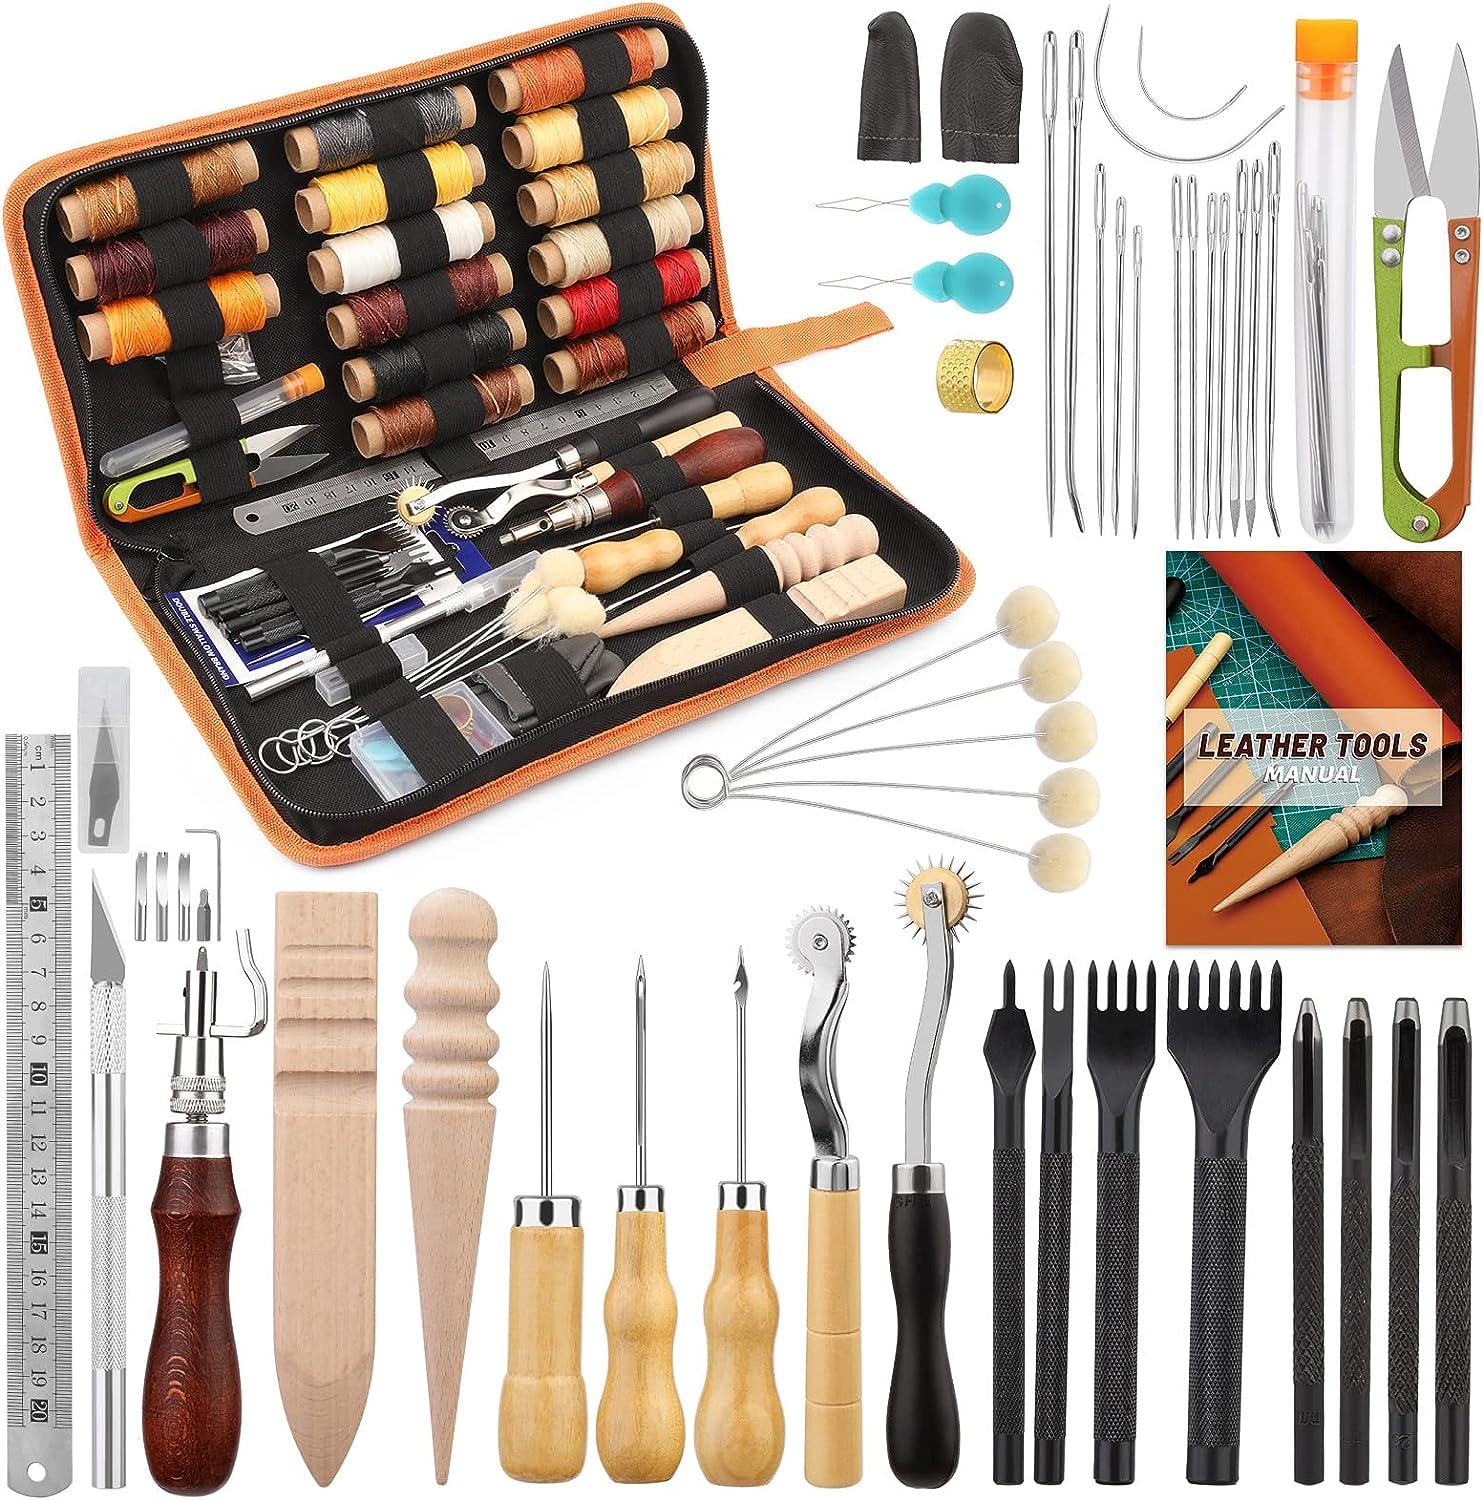 Leather Craft Tools 5 in 1 Pro Leathercraft Edge Press Kit Leather